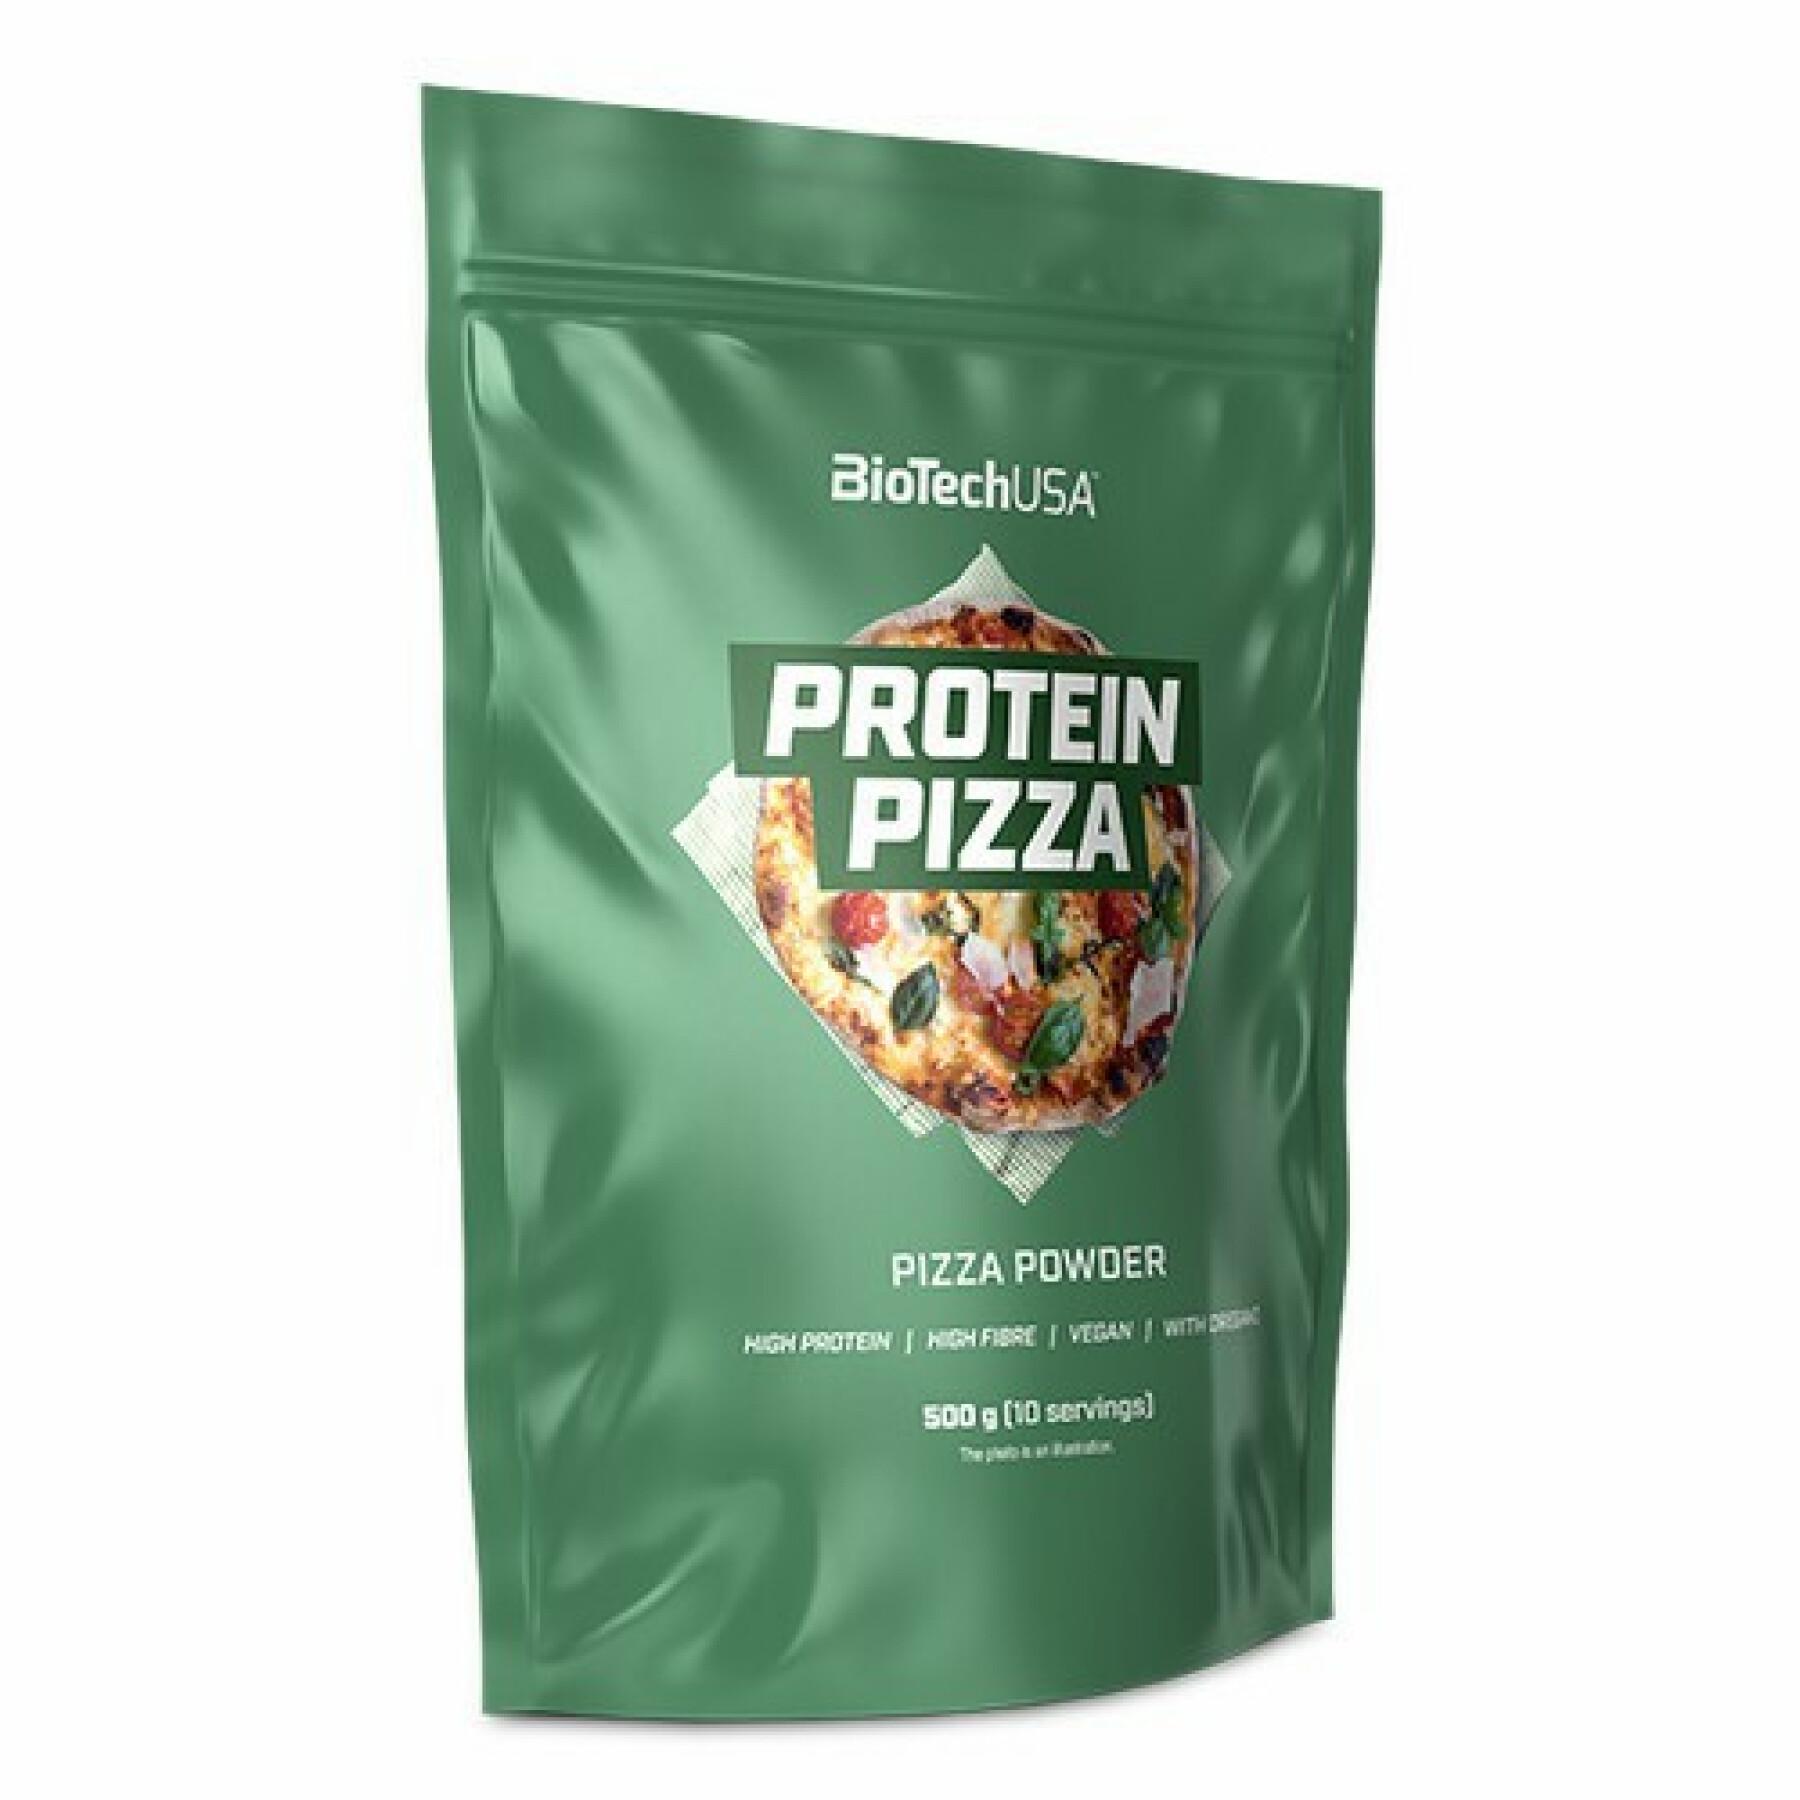 Pack of 10 bags of protein pizza snacks Biotech USA - Traditionnelle - 500g